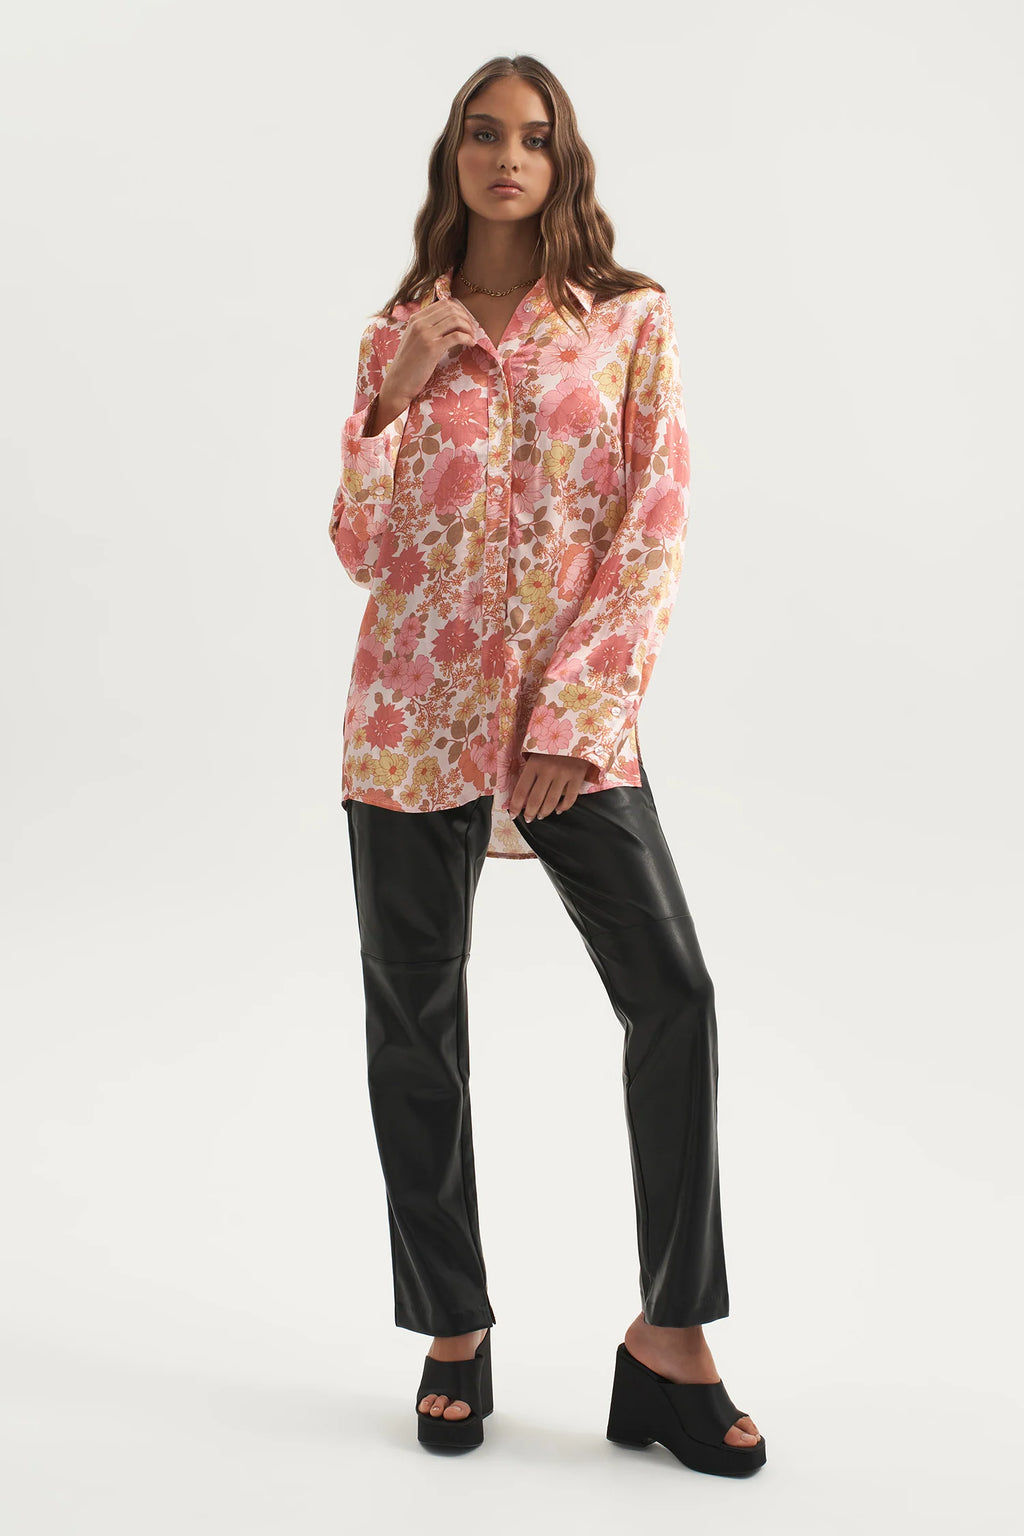 Ownley - Merry Relaxed Shirt - Pink Floral